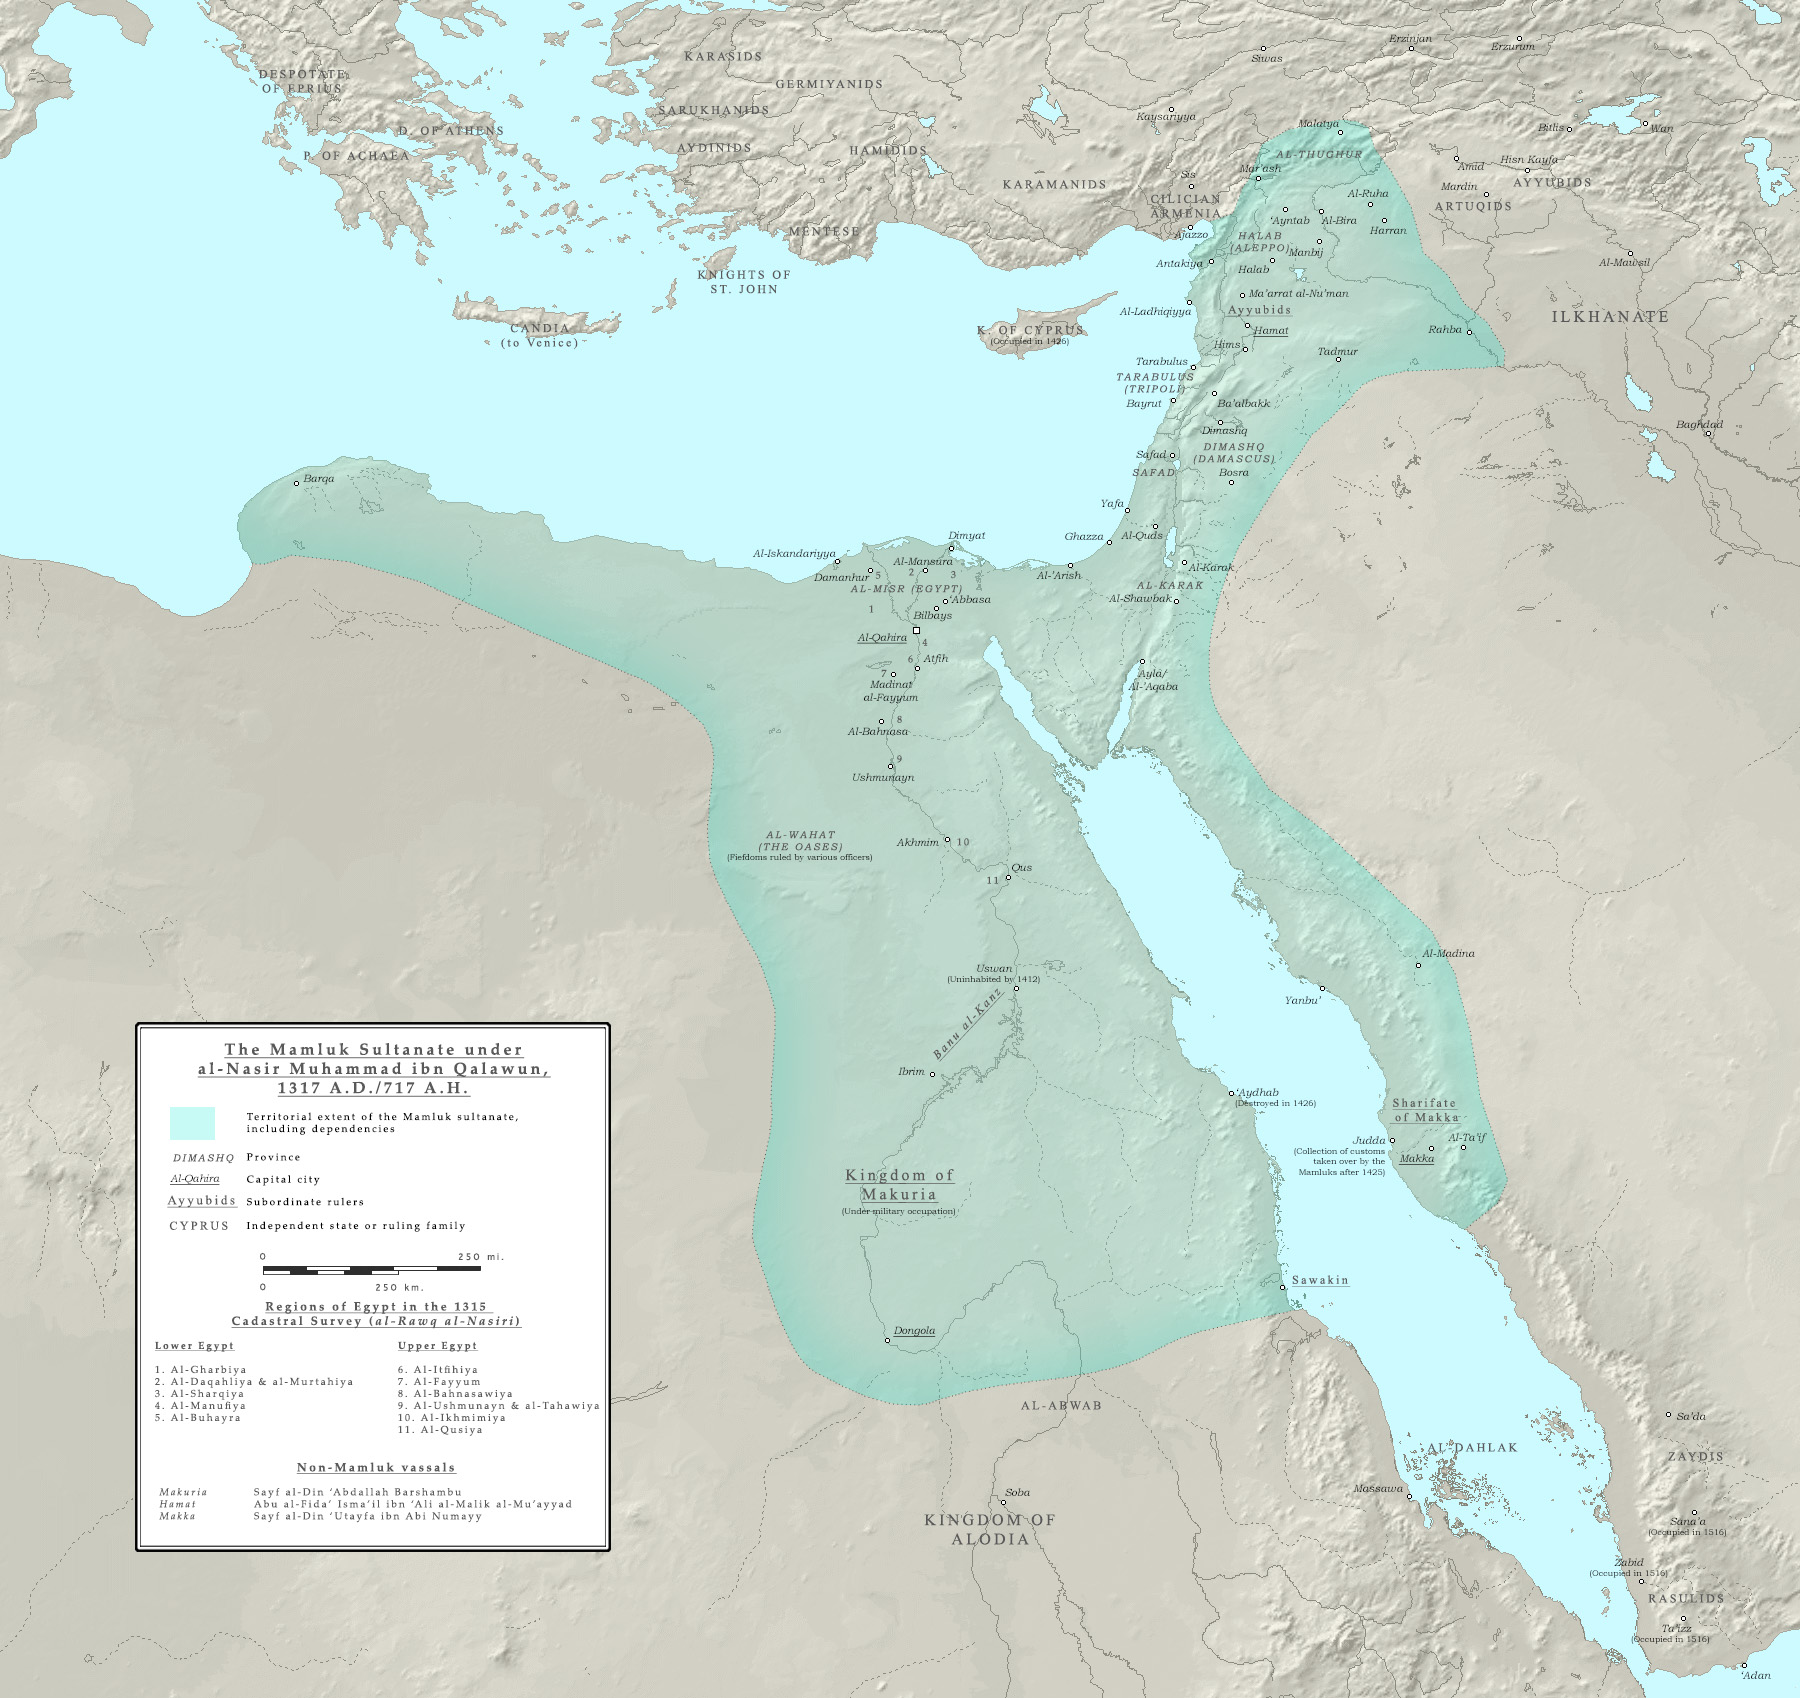 Map of the Mamluk sultanate during the third reign of al Nasir Muhammad 1317 AD Ro4444